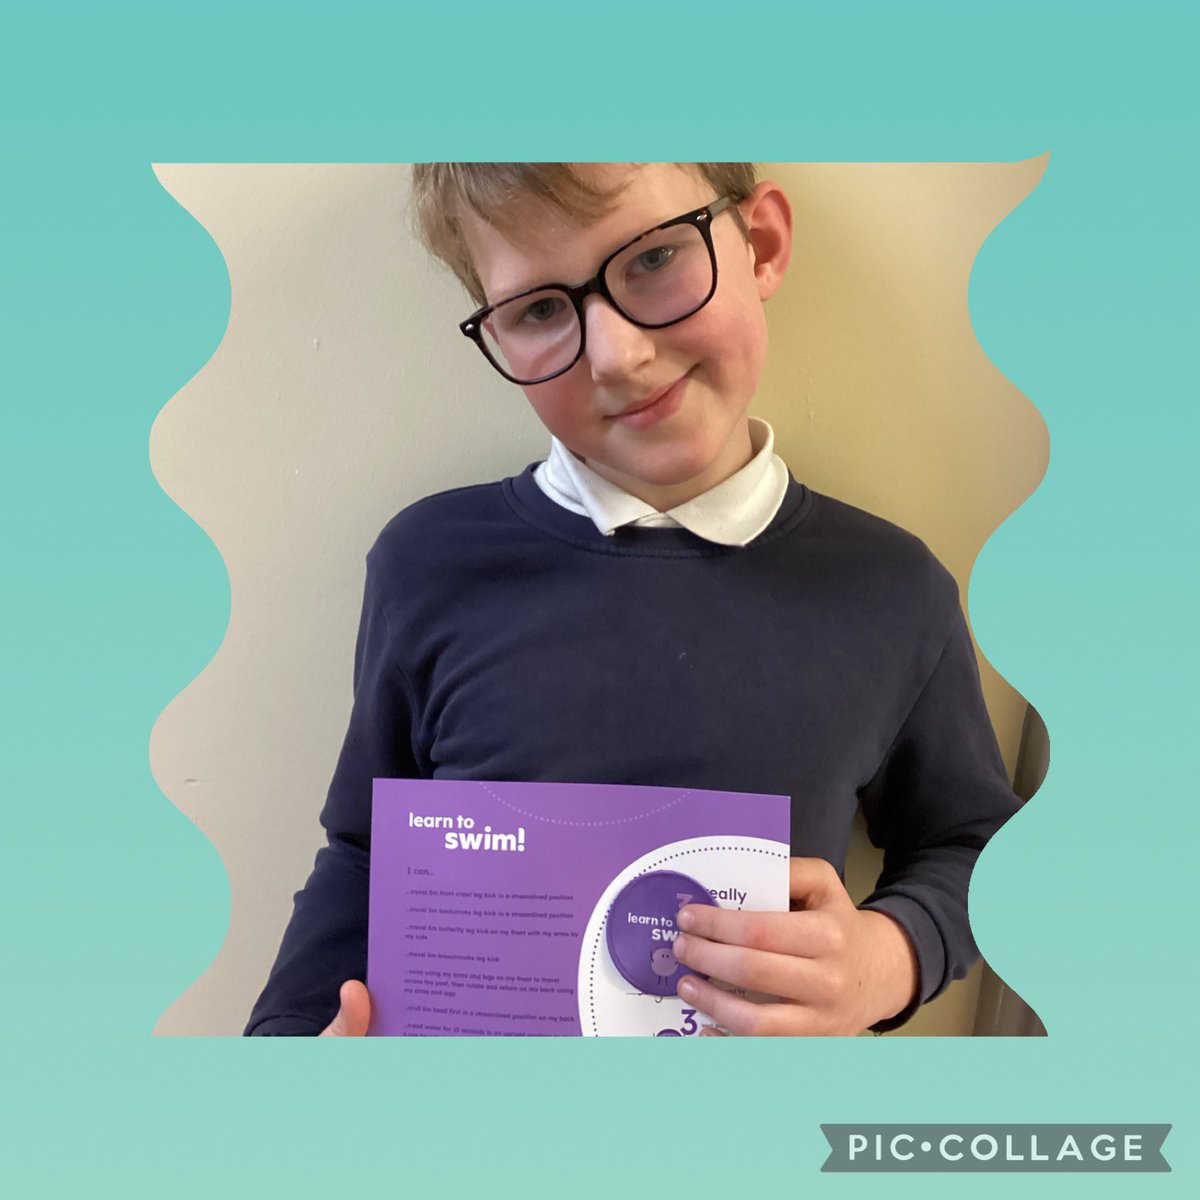 @BandBschool Another day another sporting achievement. This time a swimming award. Well done. @eboractrust #swimming #achievement #bandbhobbies